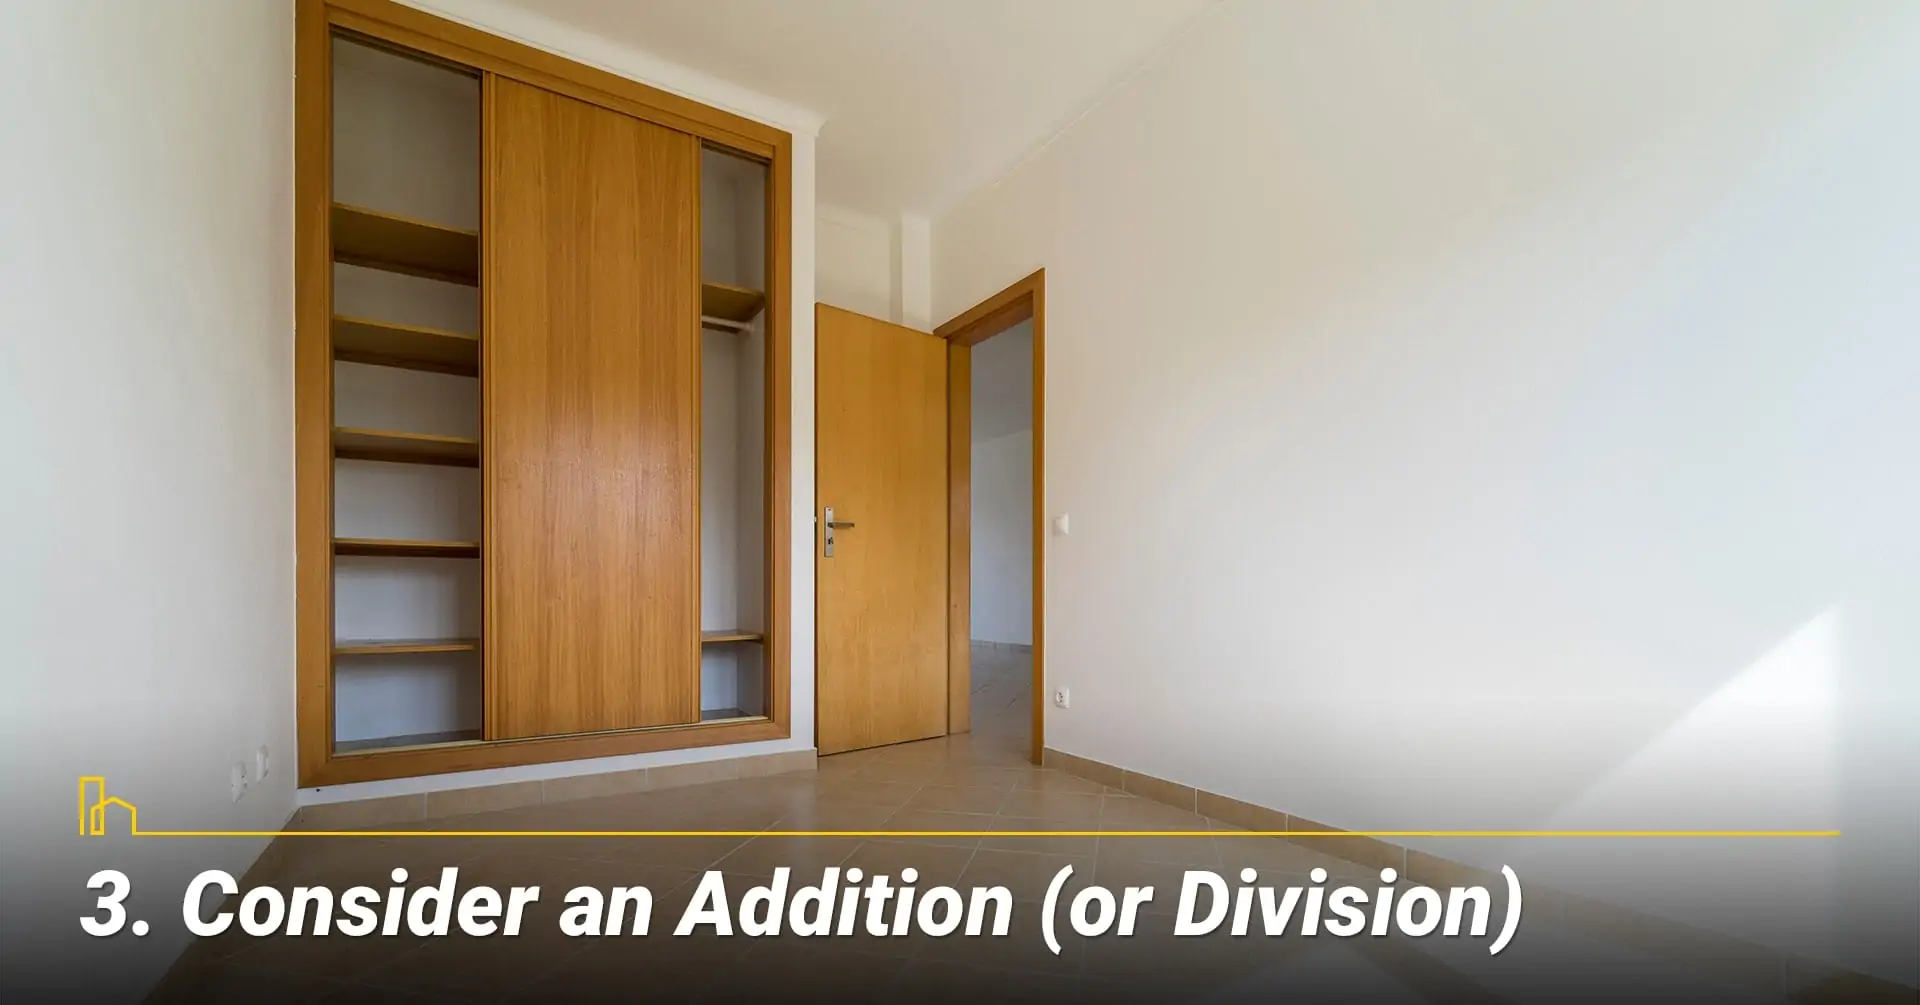 Consider an Addition (or Division), add more space